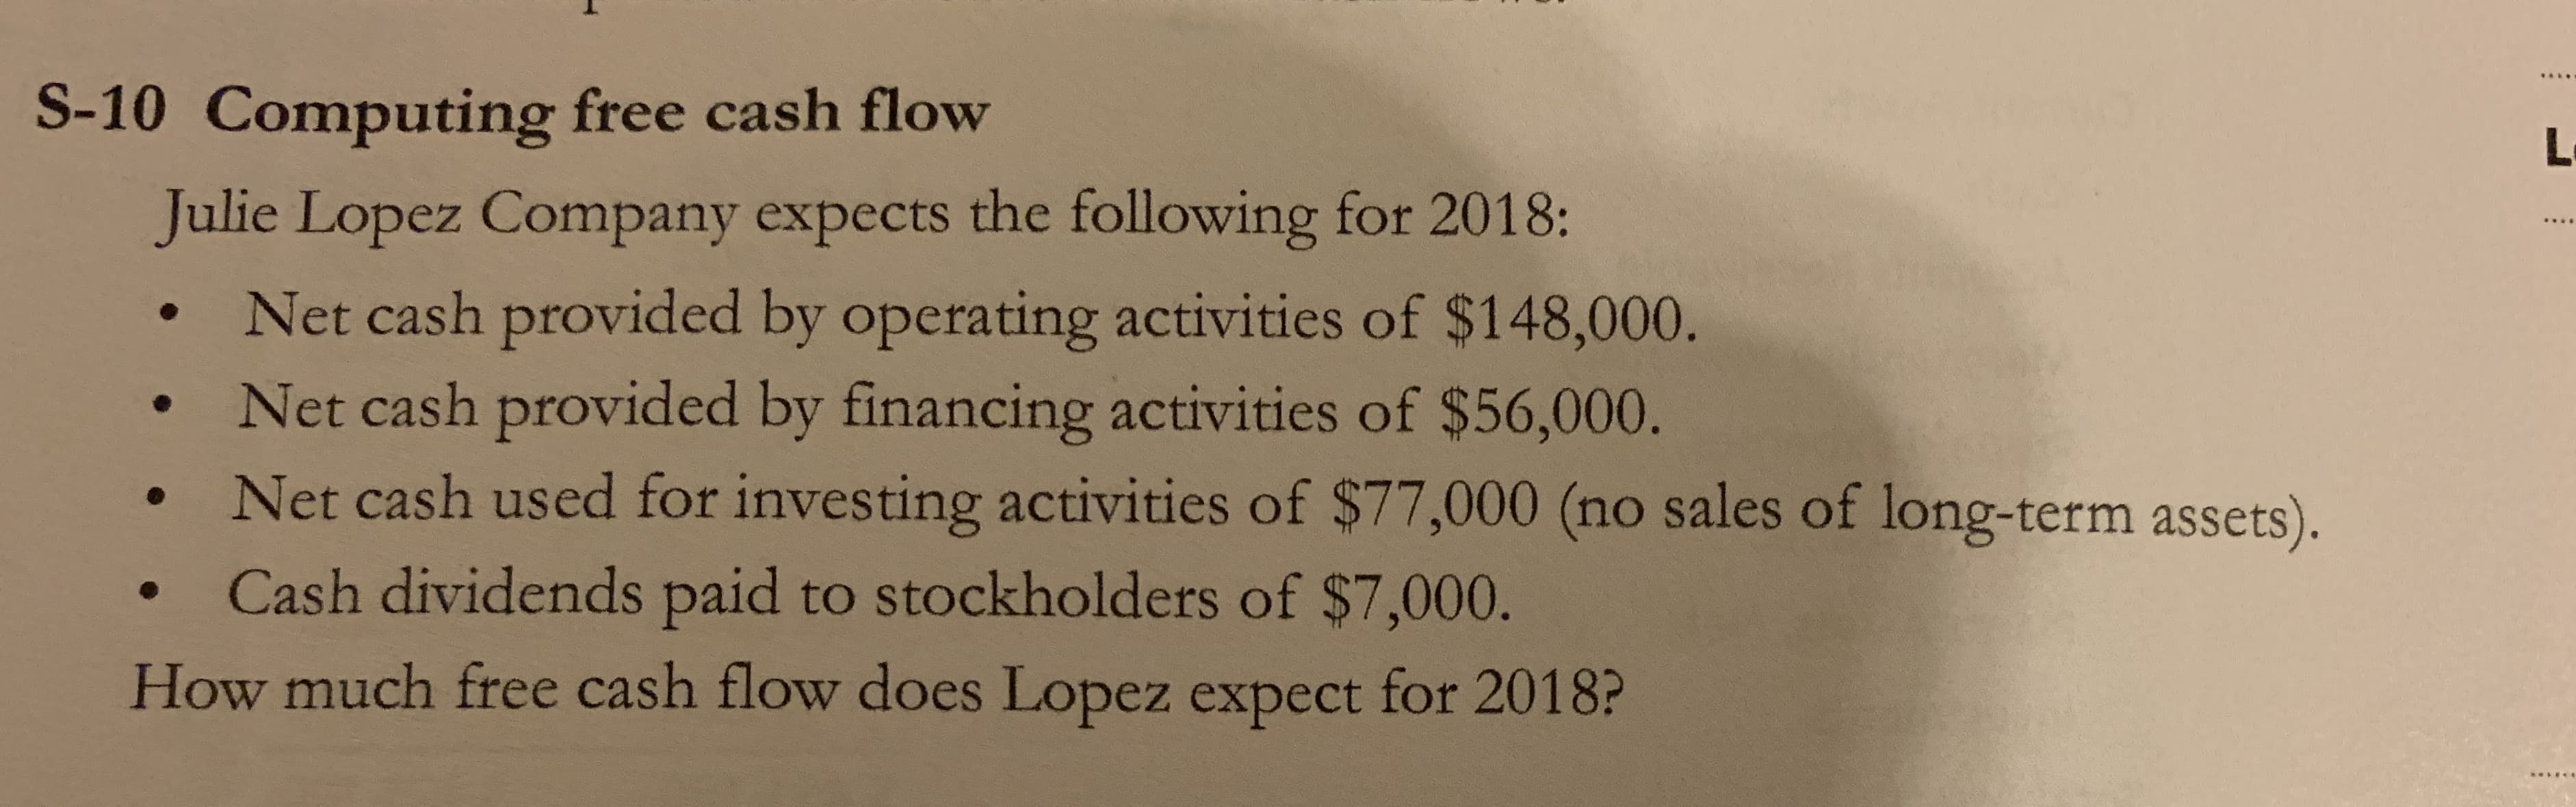 Computing free cash flow
alie Lopez Company expects the following for 2018:
Net cash provided by operating activities of $148,000.
Net cash provided by financing activities of $56,000.
Net cash used for investing activities of $77,000 (no sales of long-term assets).
Cash dividends paid to stockholders of $7,000.
ow much free cash flow does Lopez expect for 2018?
